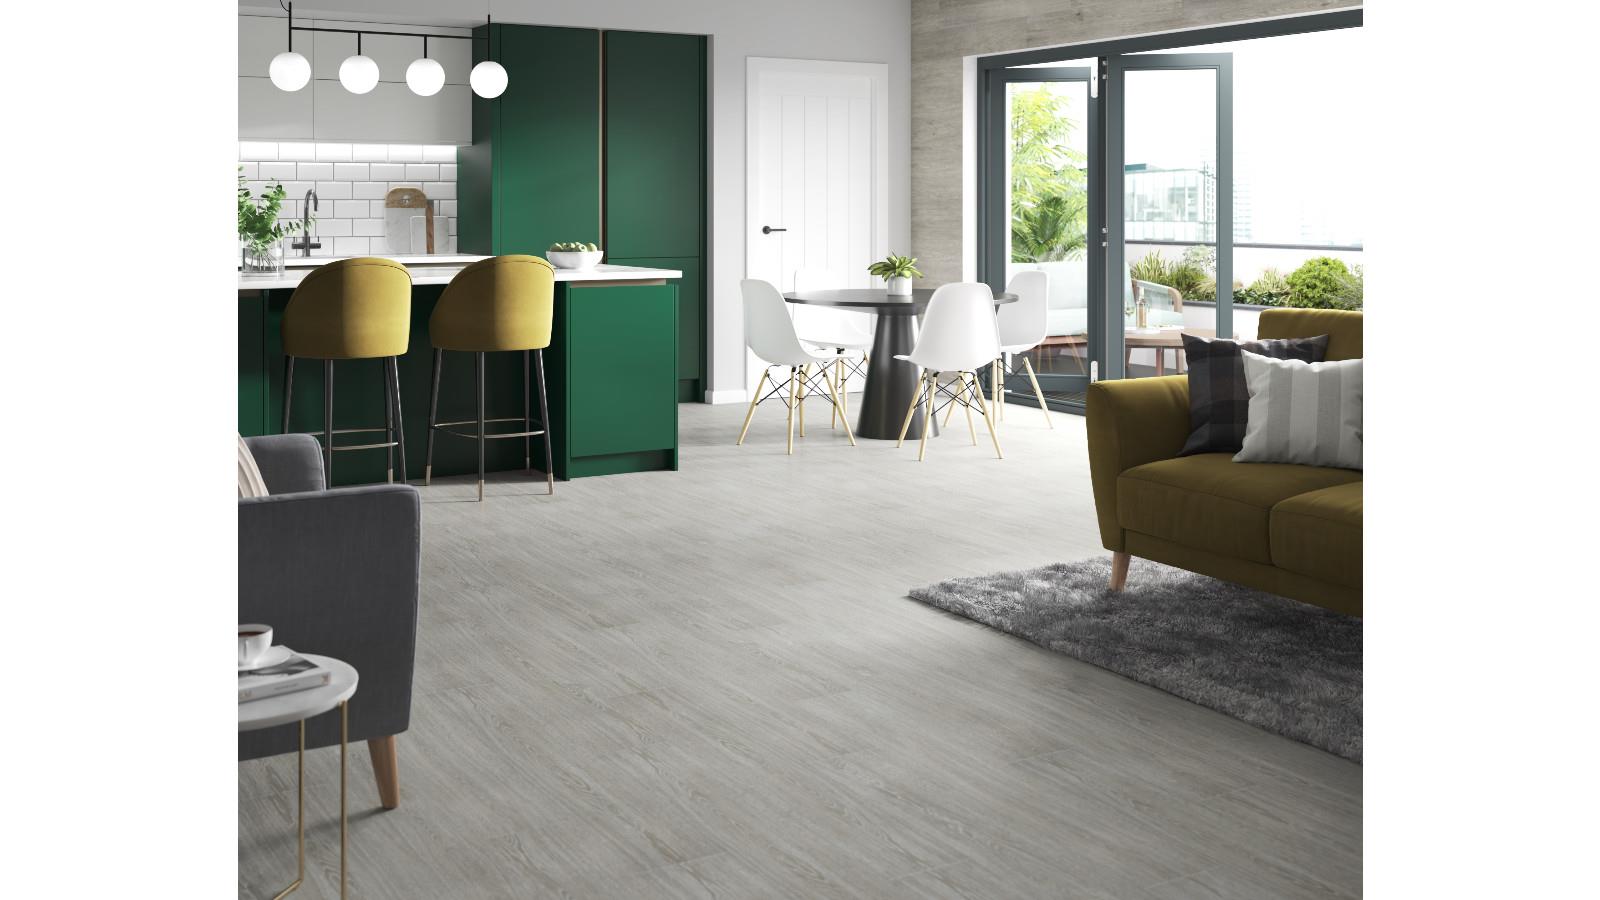 Malmo™ Freedom stickdown LVT offers a stable flooring solution in kitchens and open plan spaces image